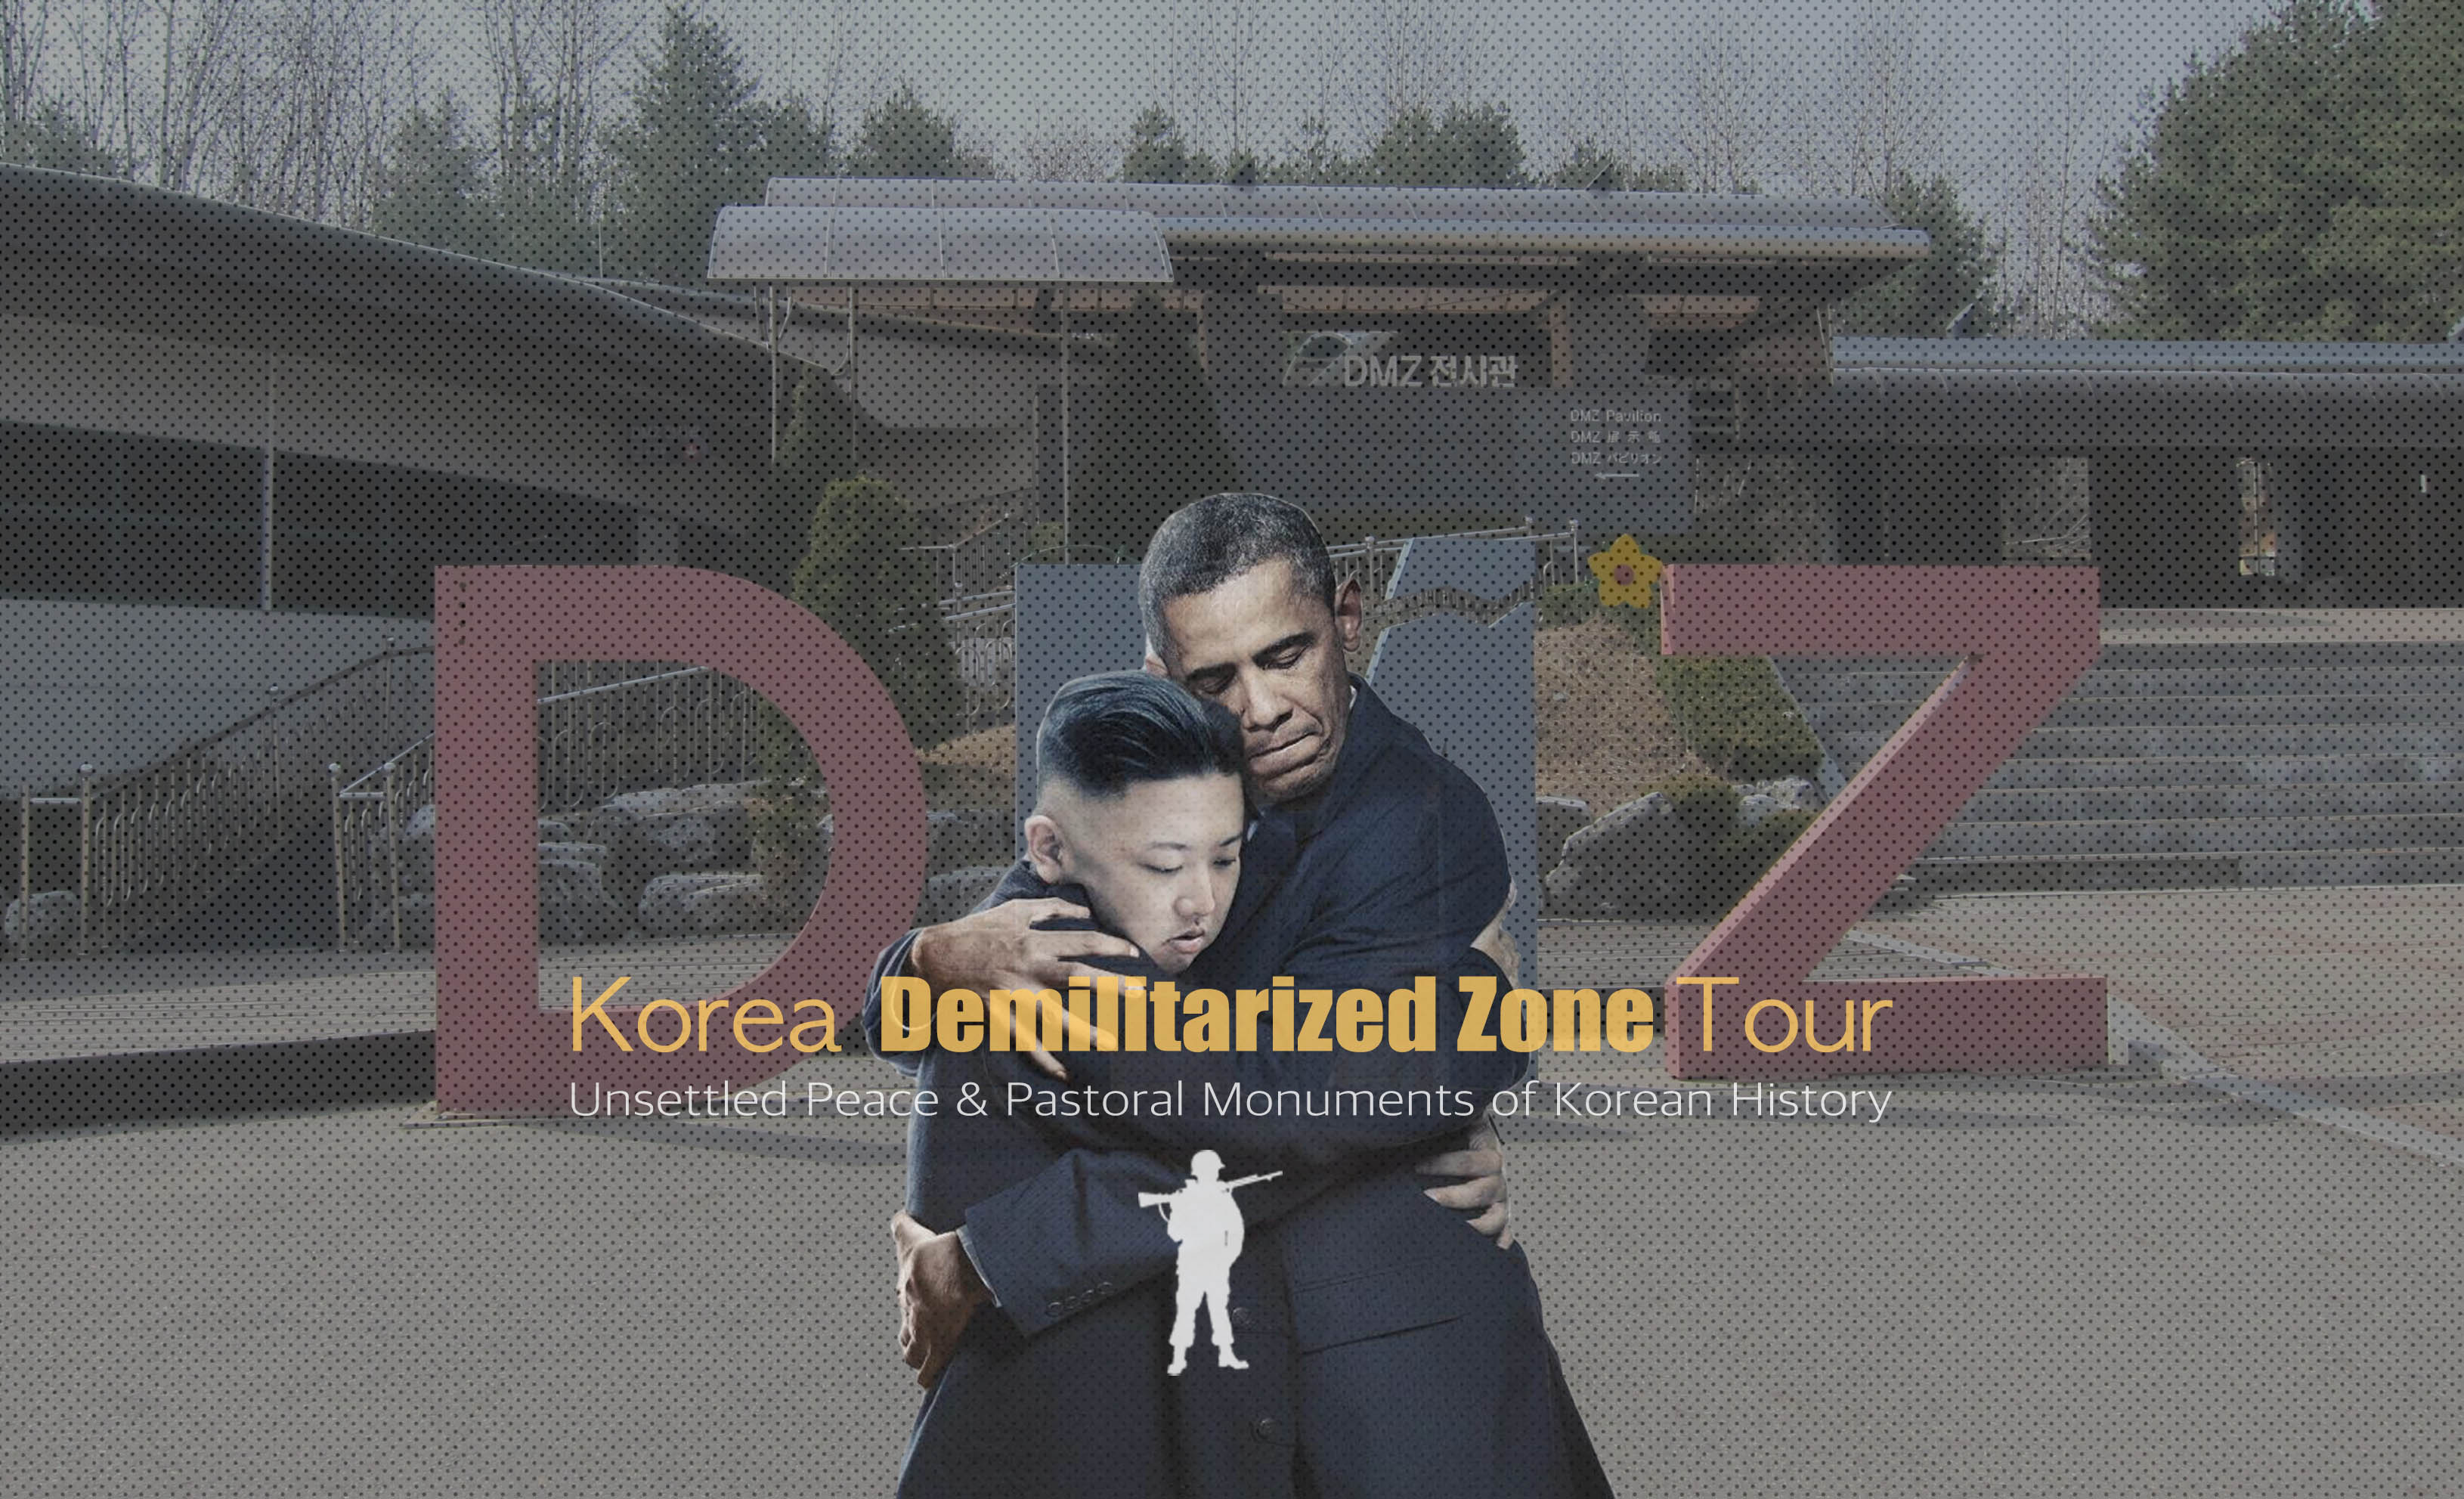 DMZ Tour by German friends was the best on 'Welcome, first time in Korea?'